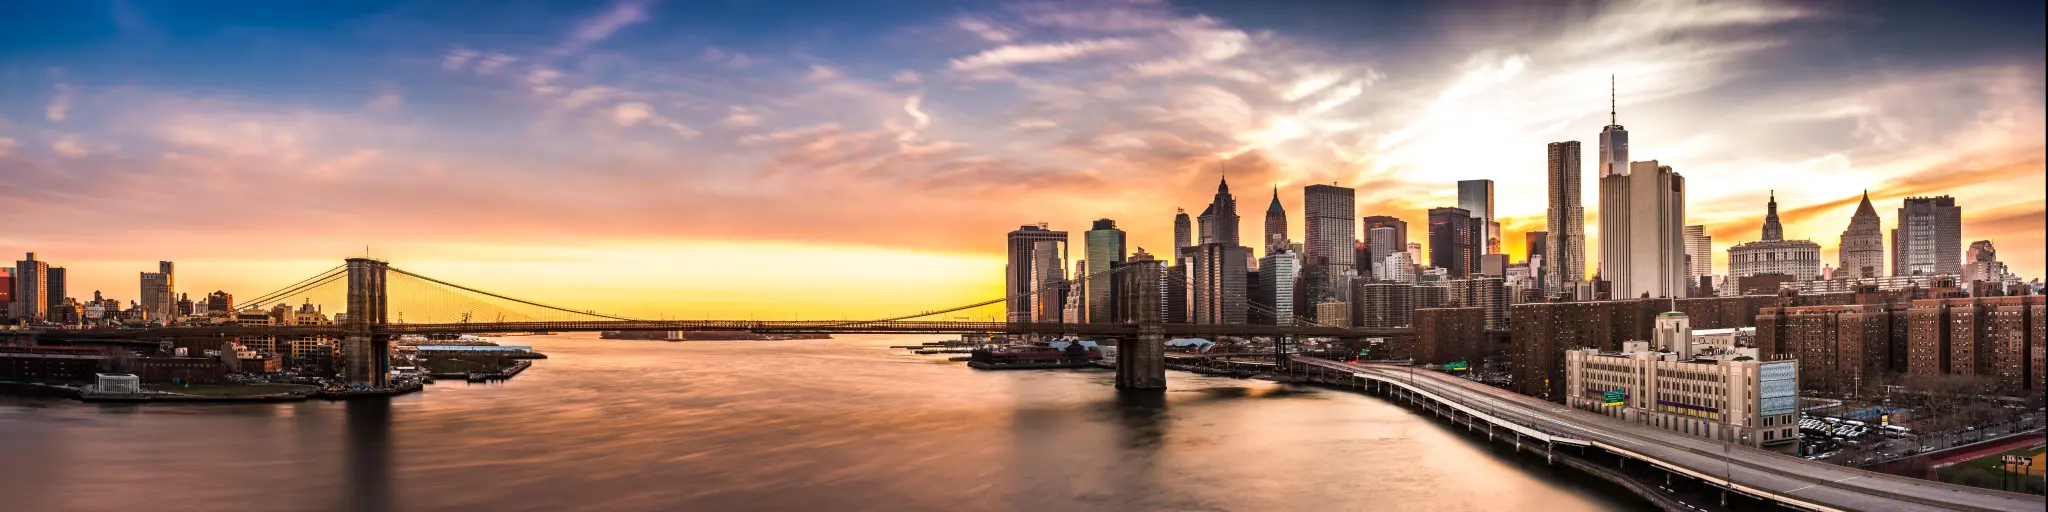 New York City Skyline at sunset with Brooklyn Bridge and Wall Street skyscrapers 